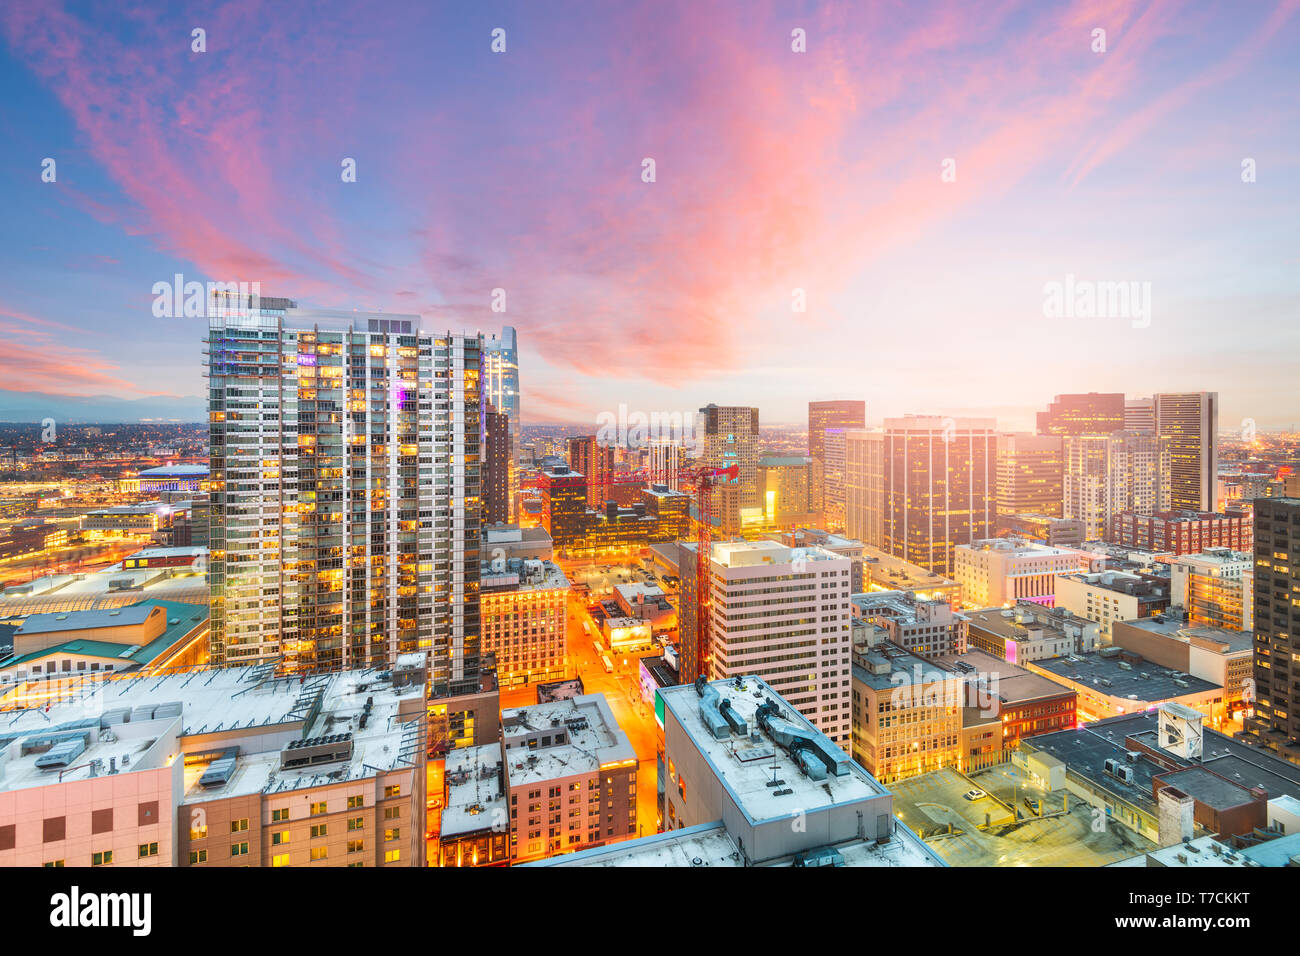 Denver, Colorado, USA downtown cityscape rooftop view at dusk. Stock Photo